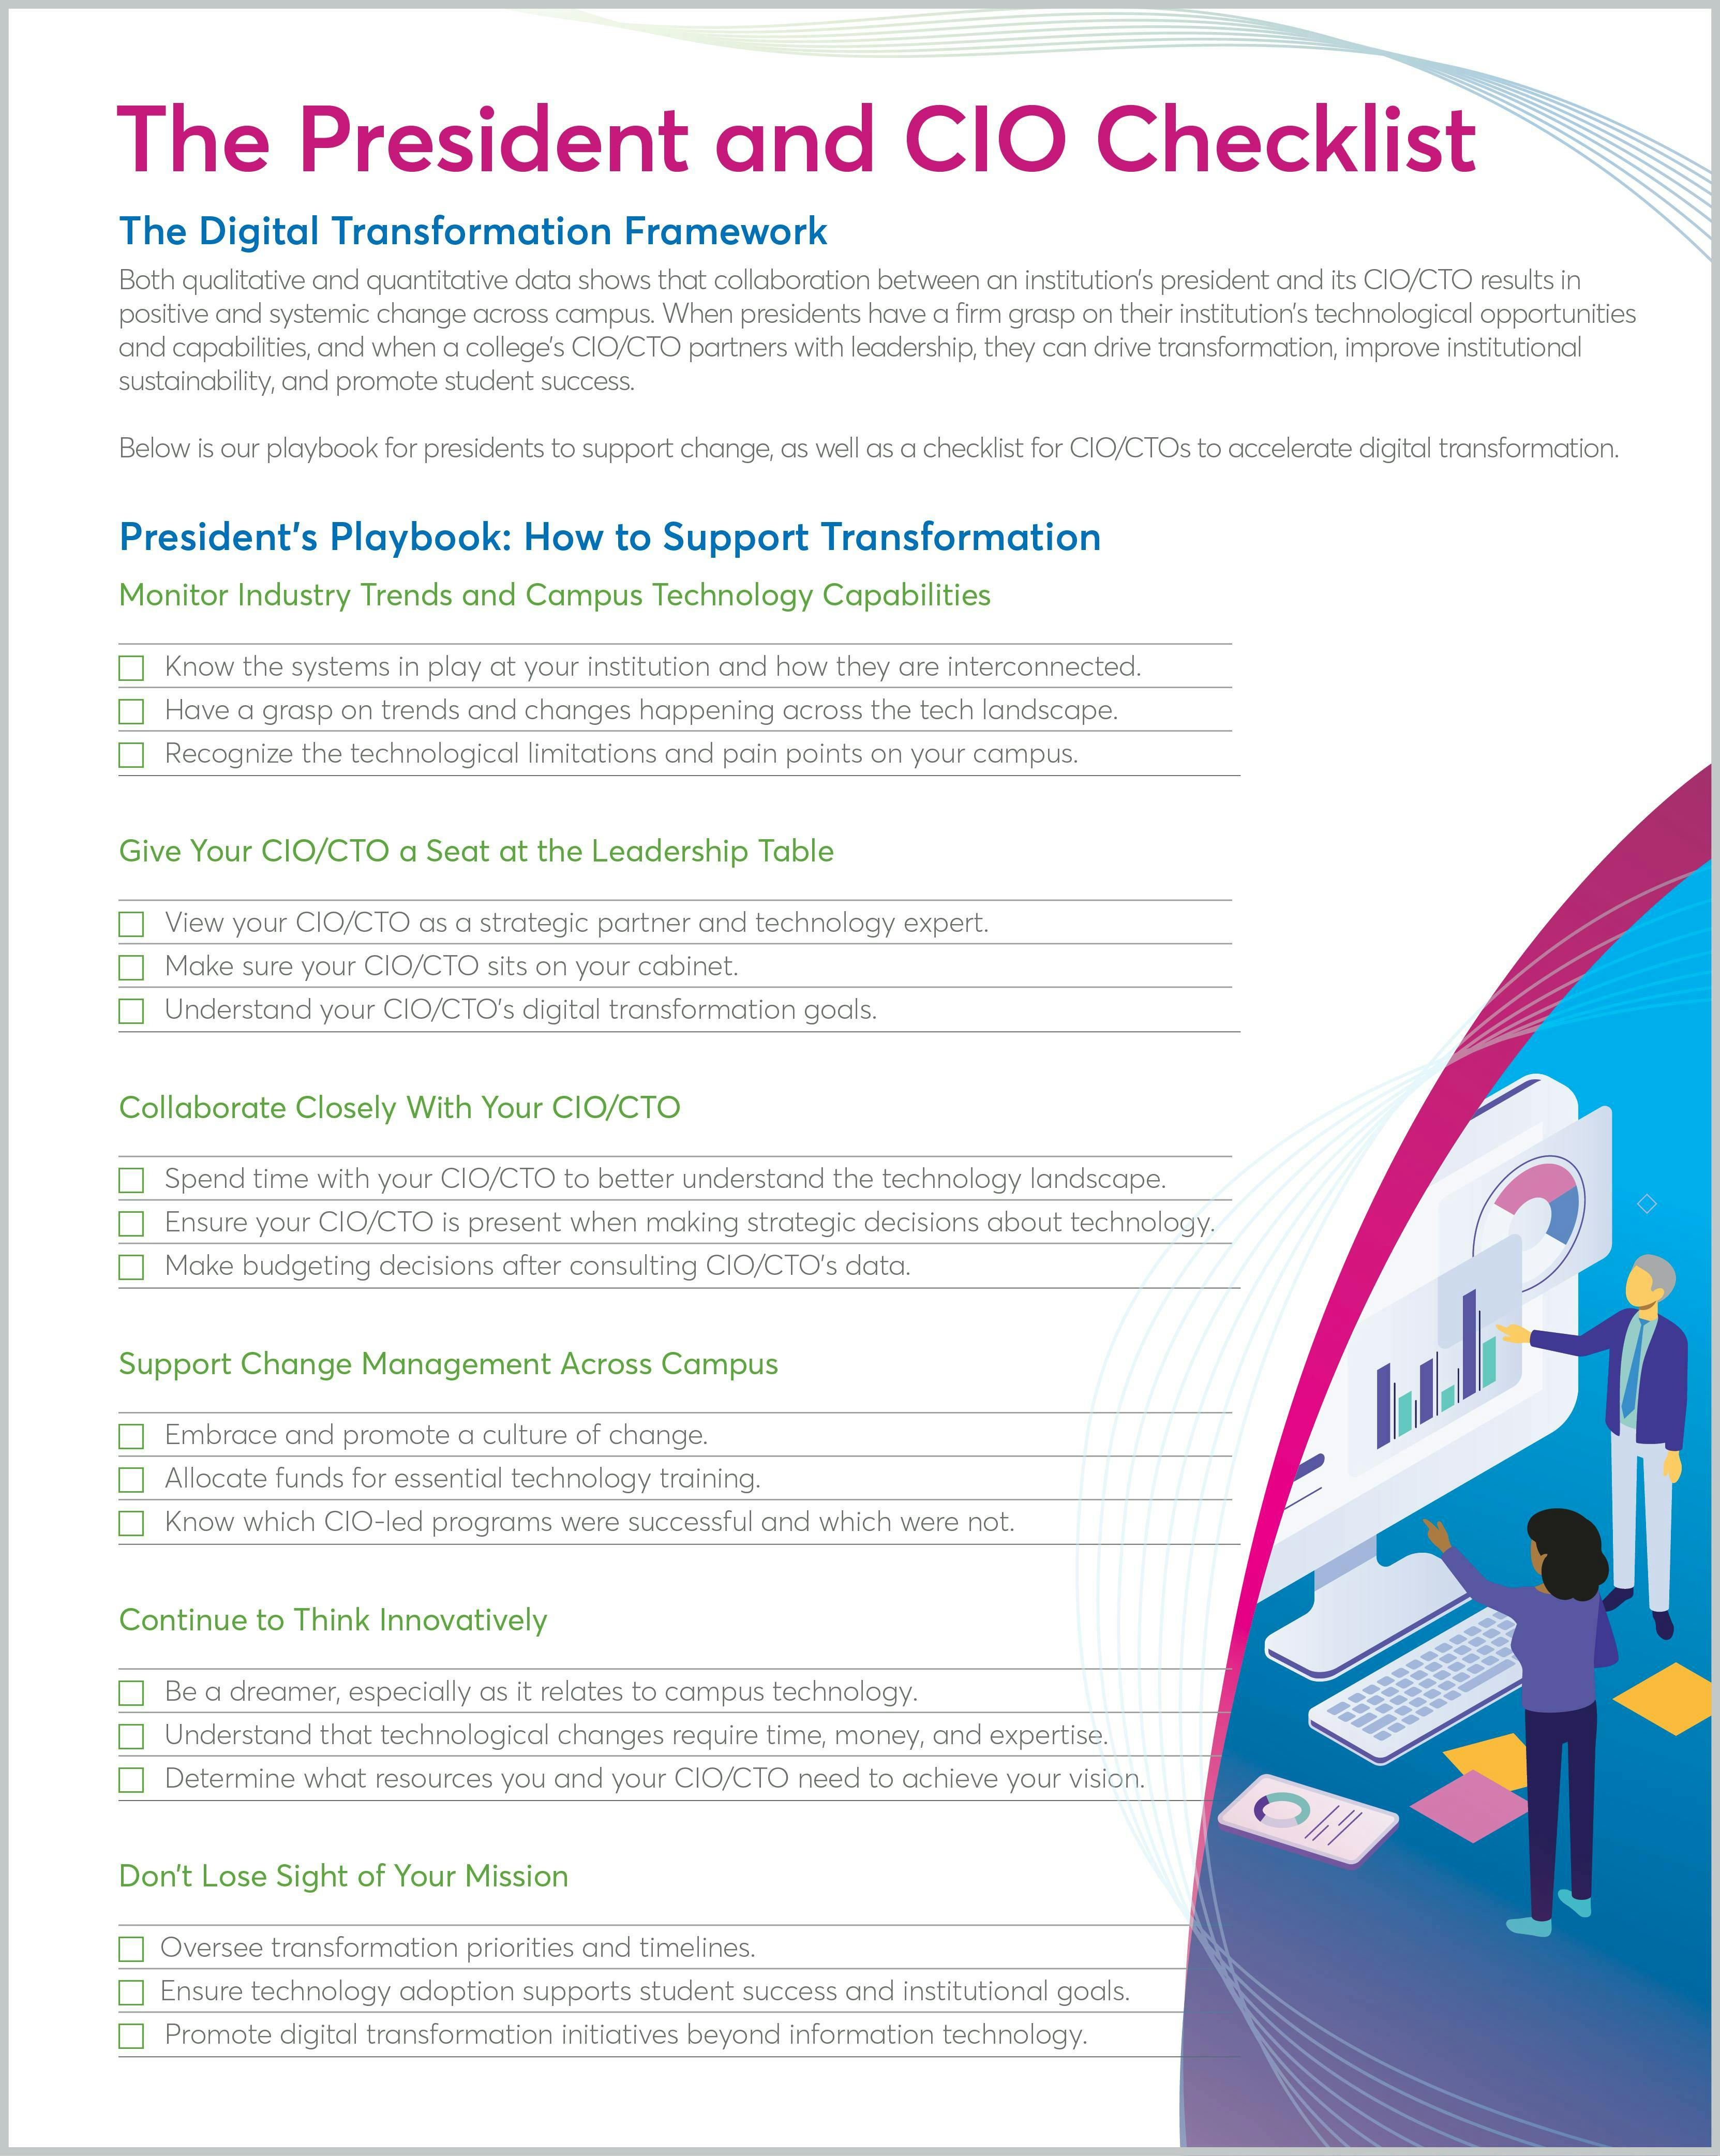 President Playbook: How to Support Transformation